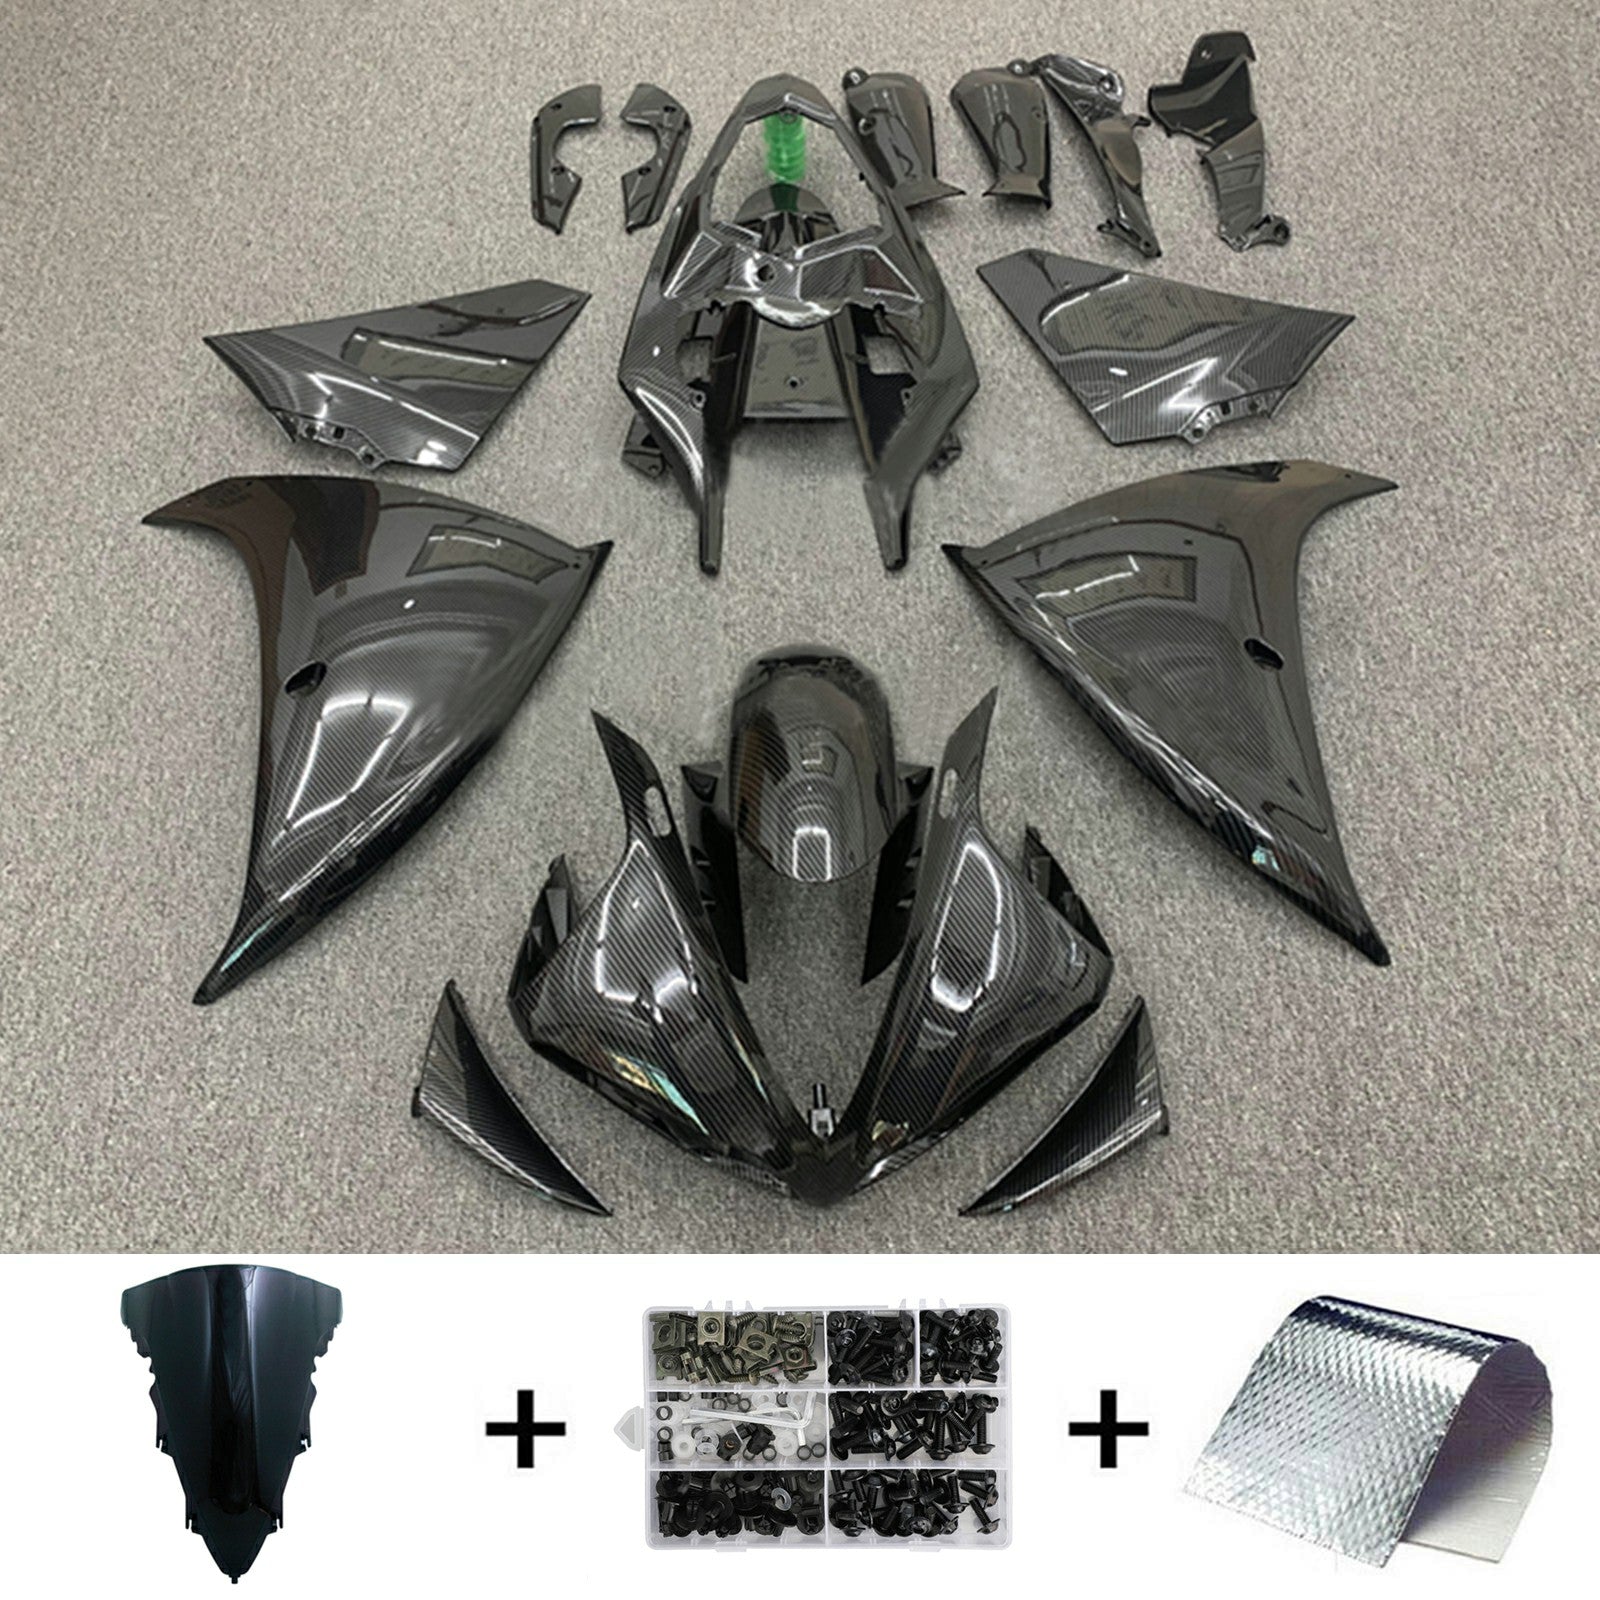 Amotopart Yamaha YZF 1000 R1 2009-2011 Kit carena carrozzeria in plastica ABS